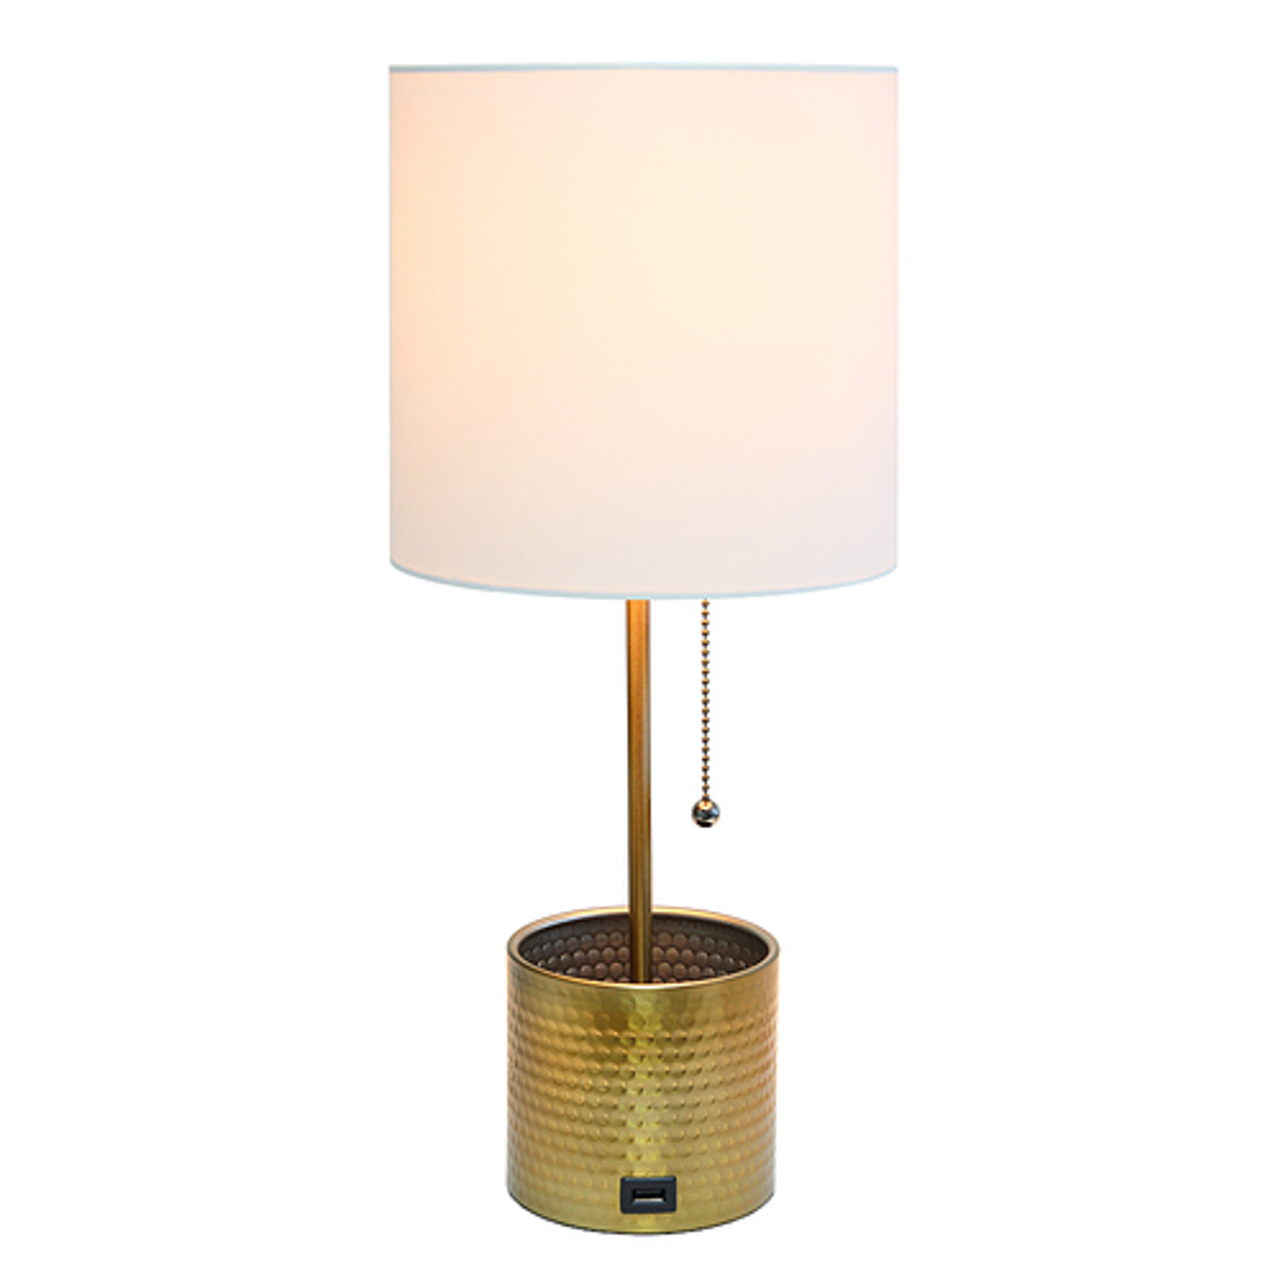 Simple Designs Hammered Metal Organizer Table Lamp with USB charging port and Fabric Shade, Gold - Gold base/White shade